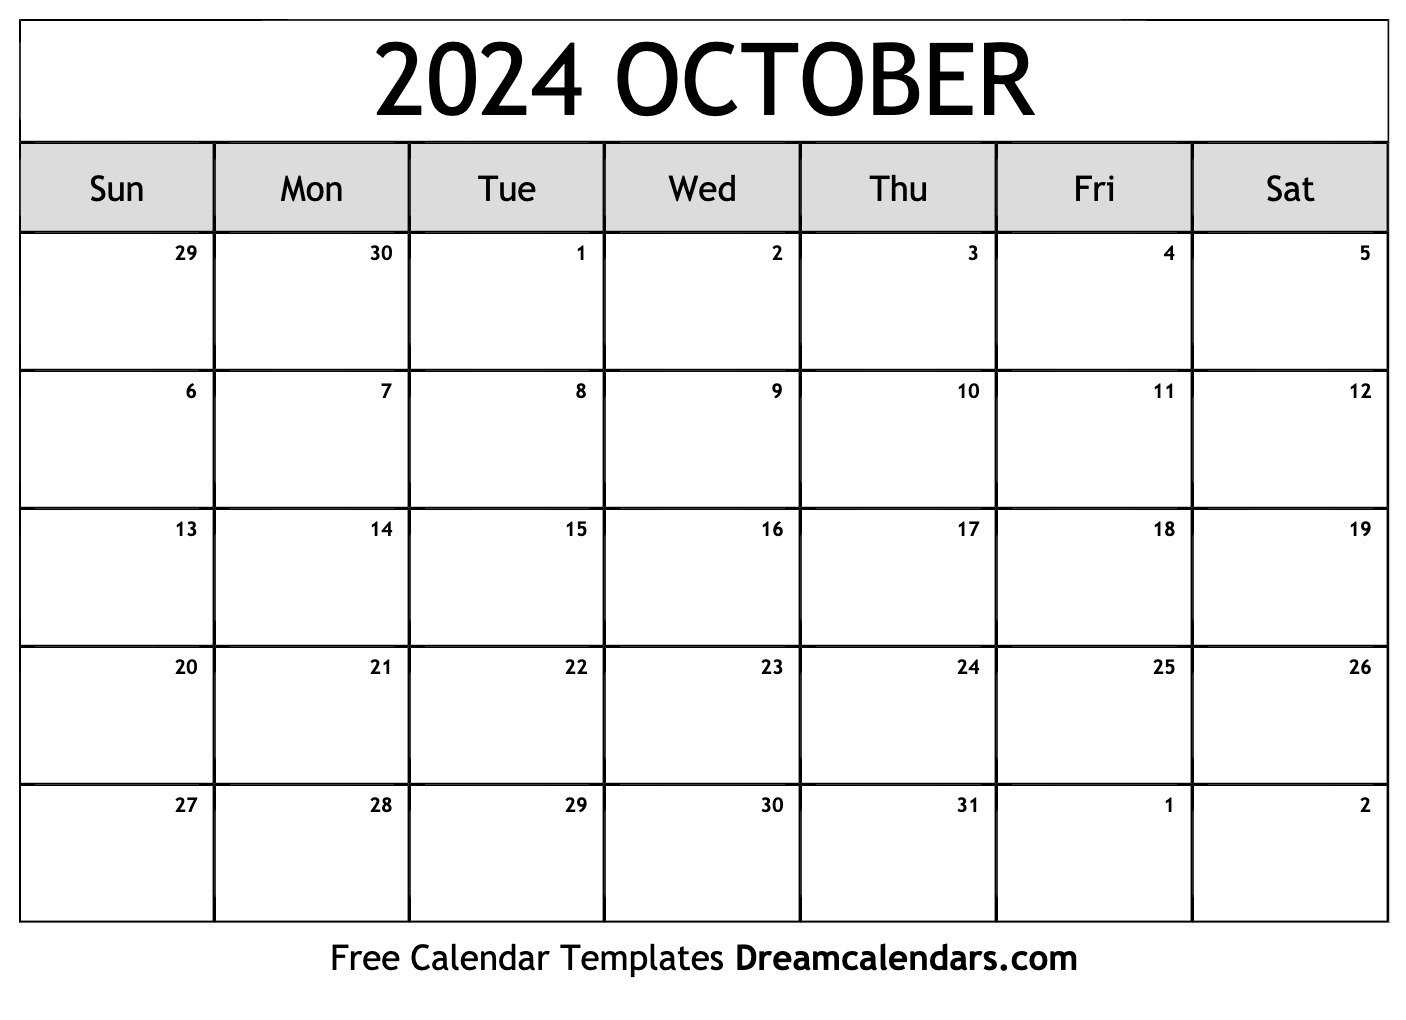 October 2024 Calendar | Free Blank Printable With Holidays pertaining to Free Printable Blank Calendar October 2024